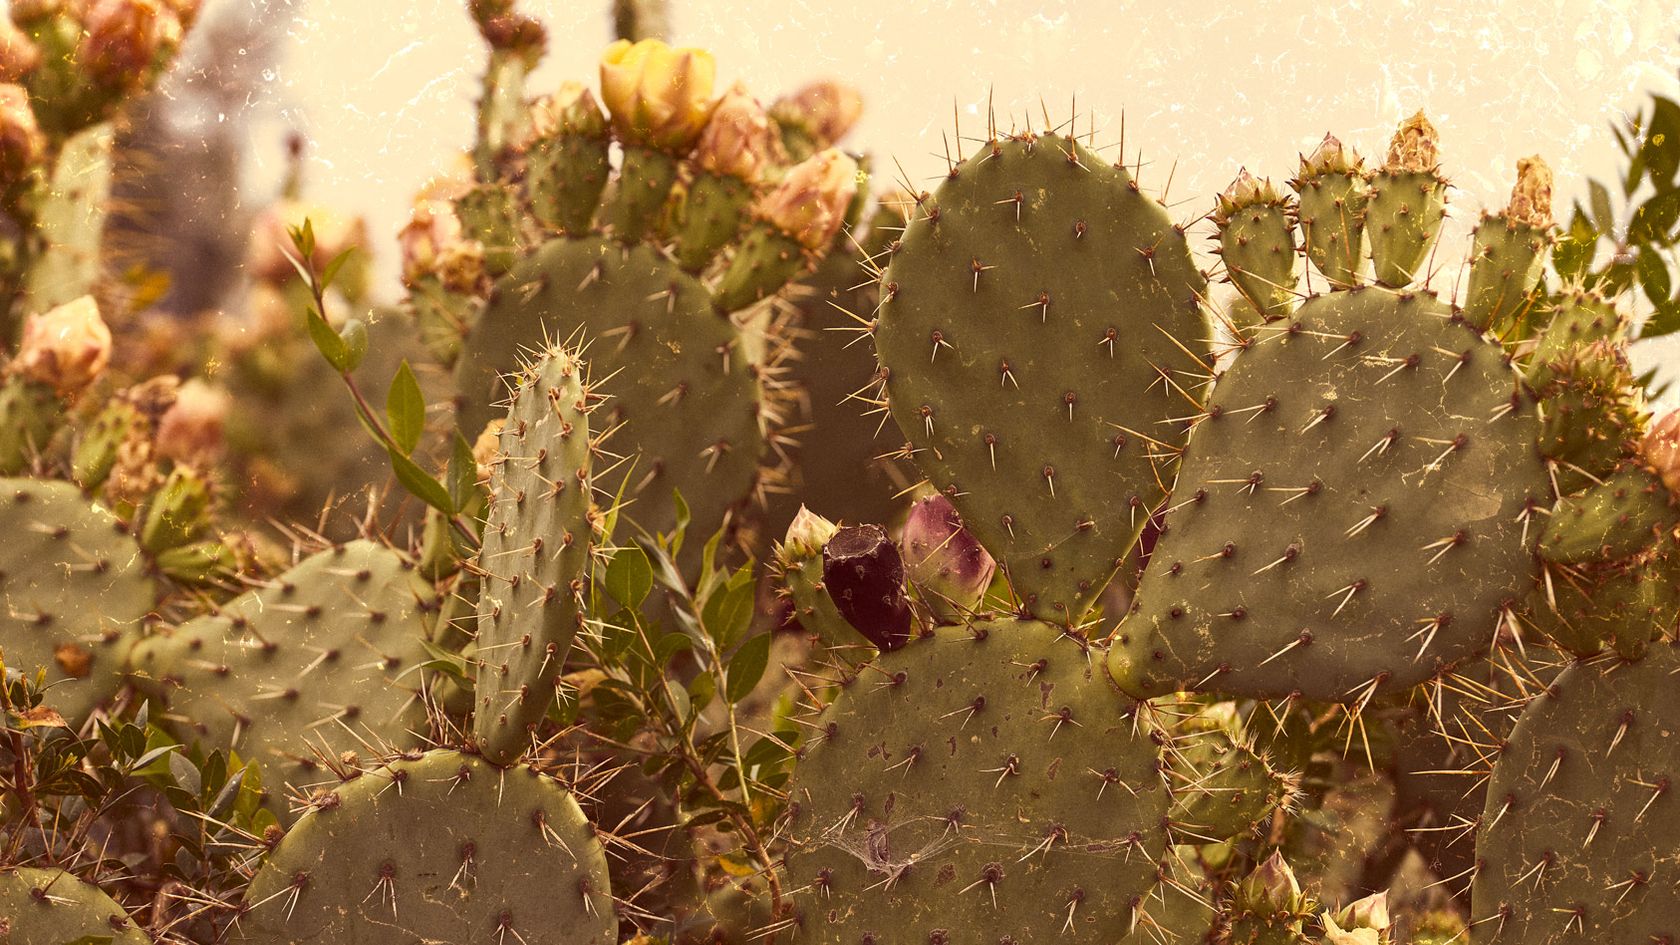 Another Vintage-looking photo, of cacti this time